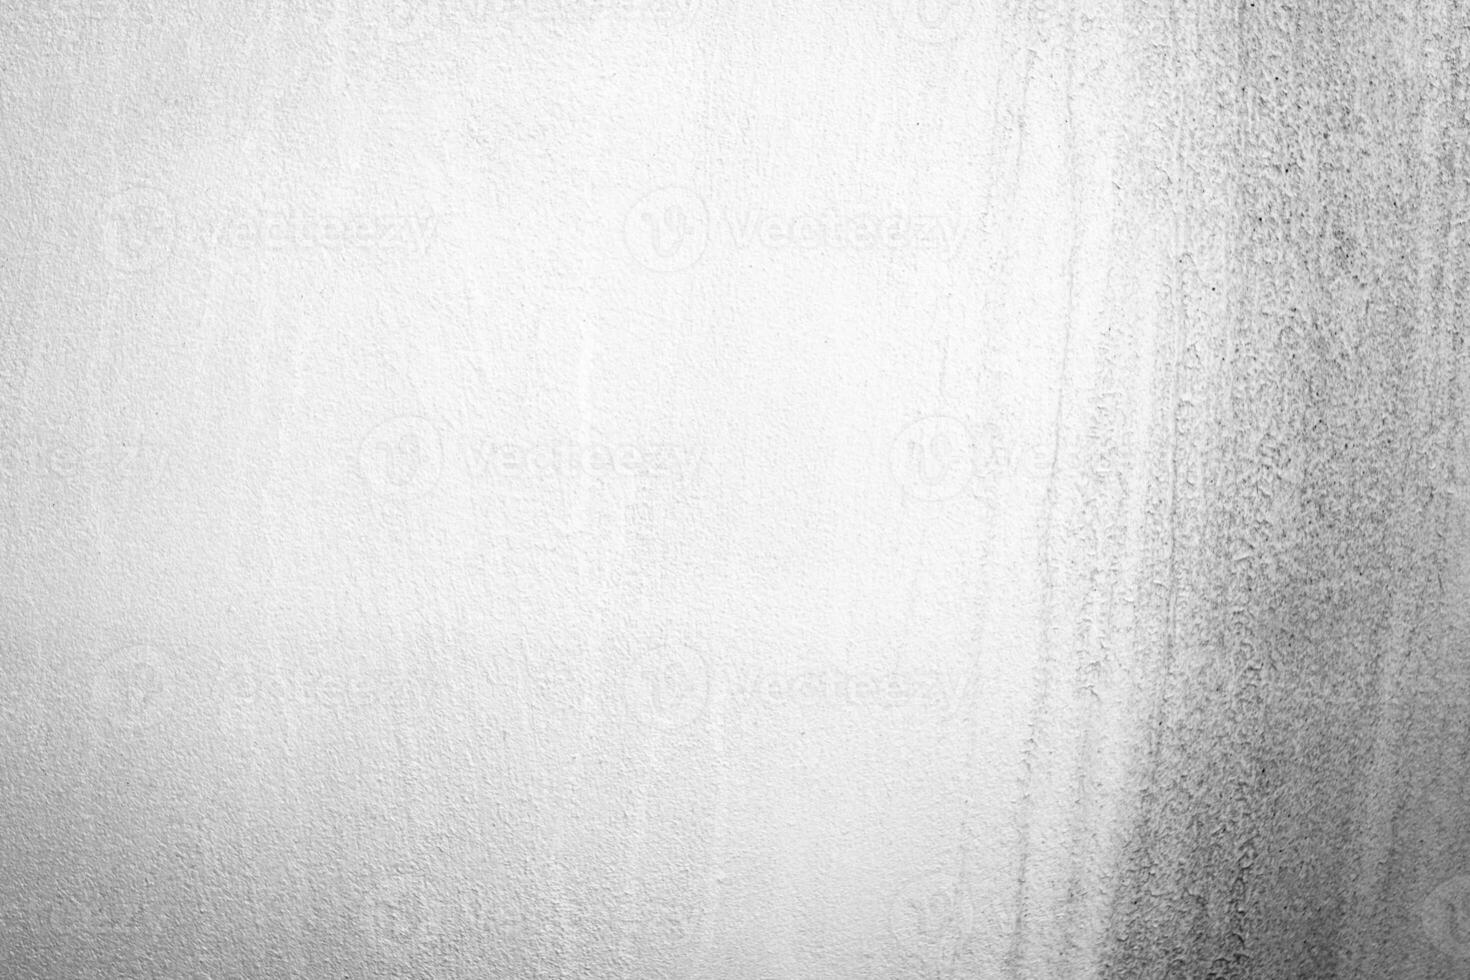 Abstract photocopy texture background, Double exposure, Grunge photocopy texture background photo